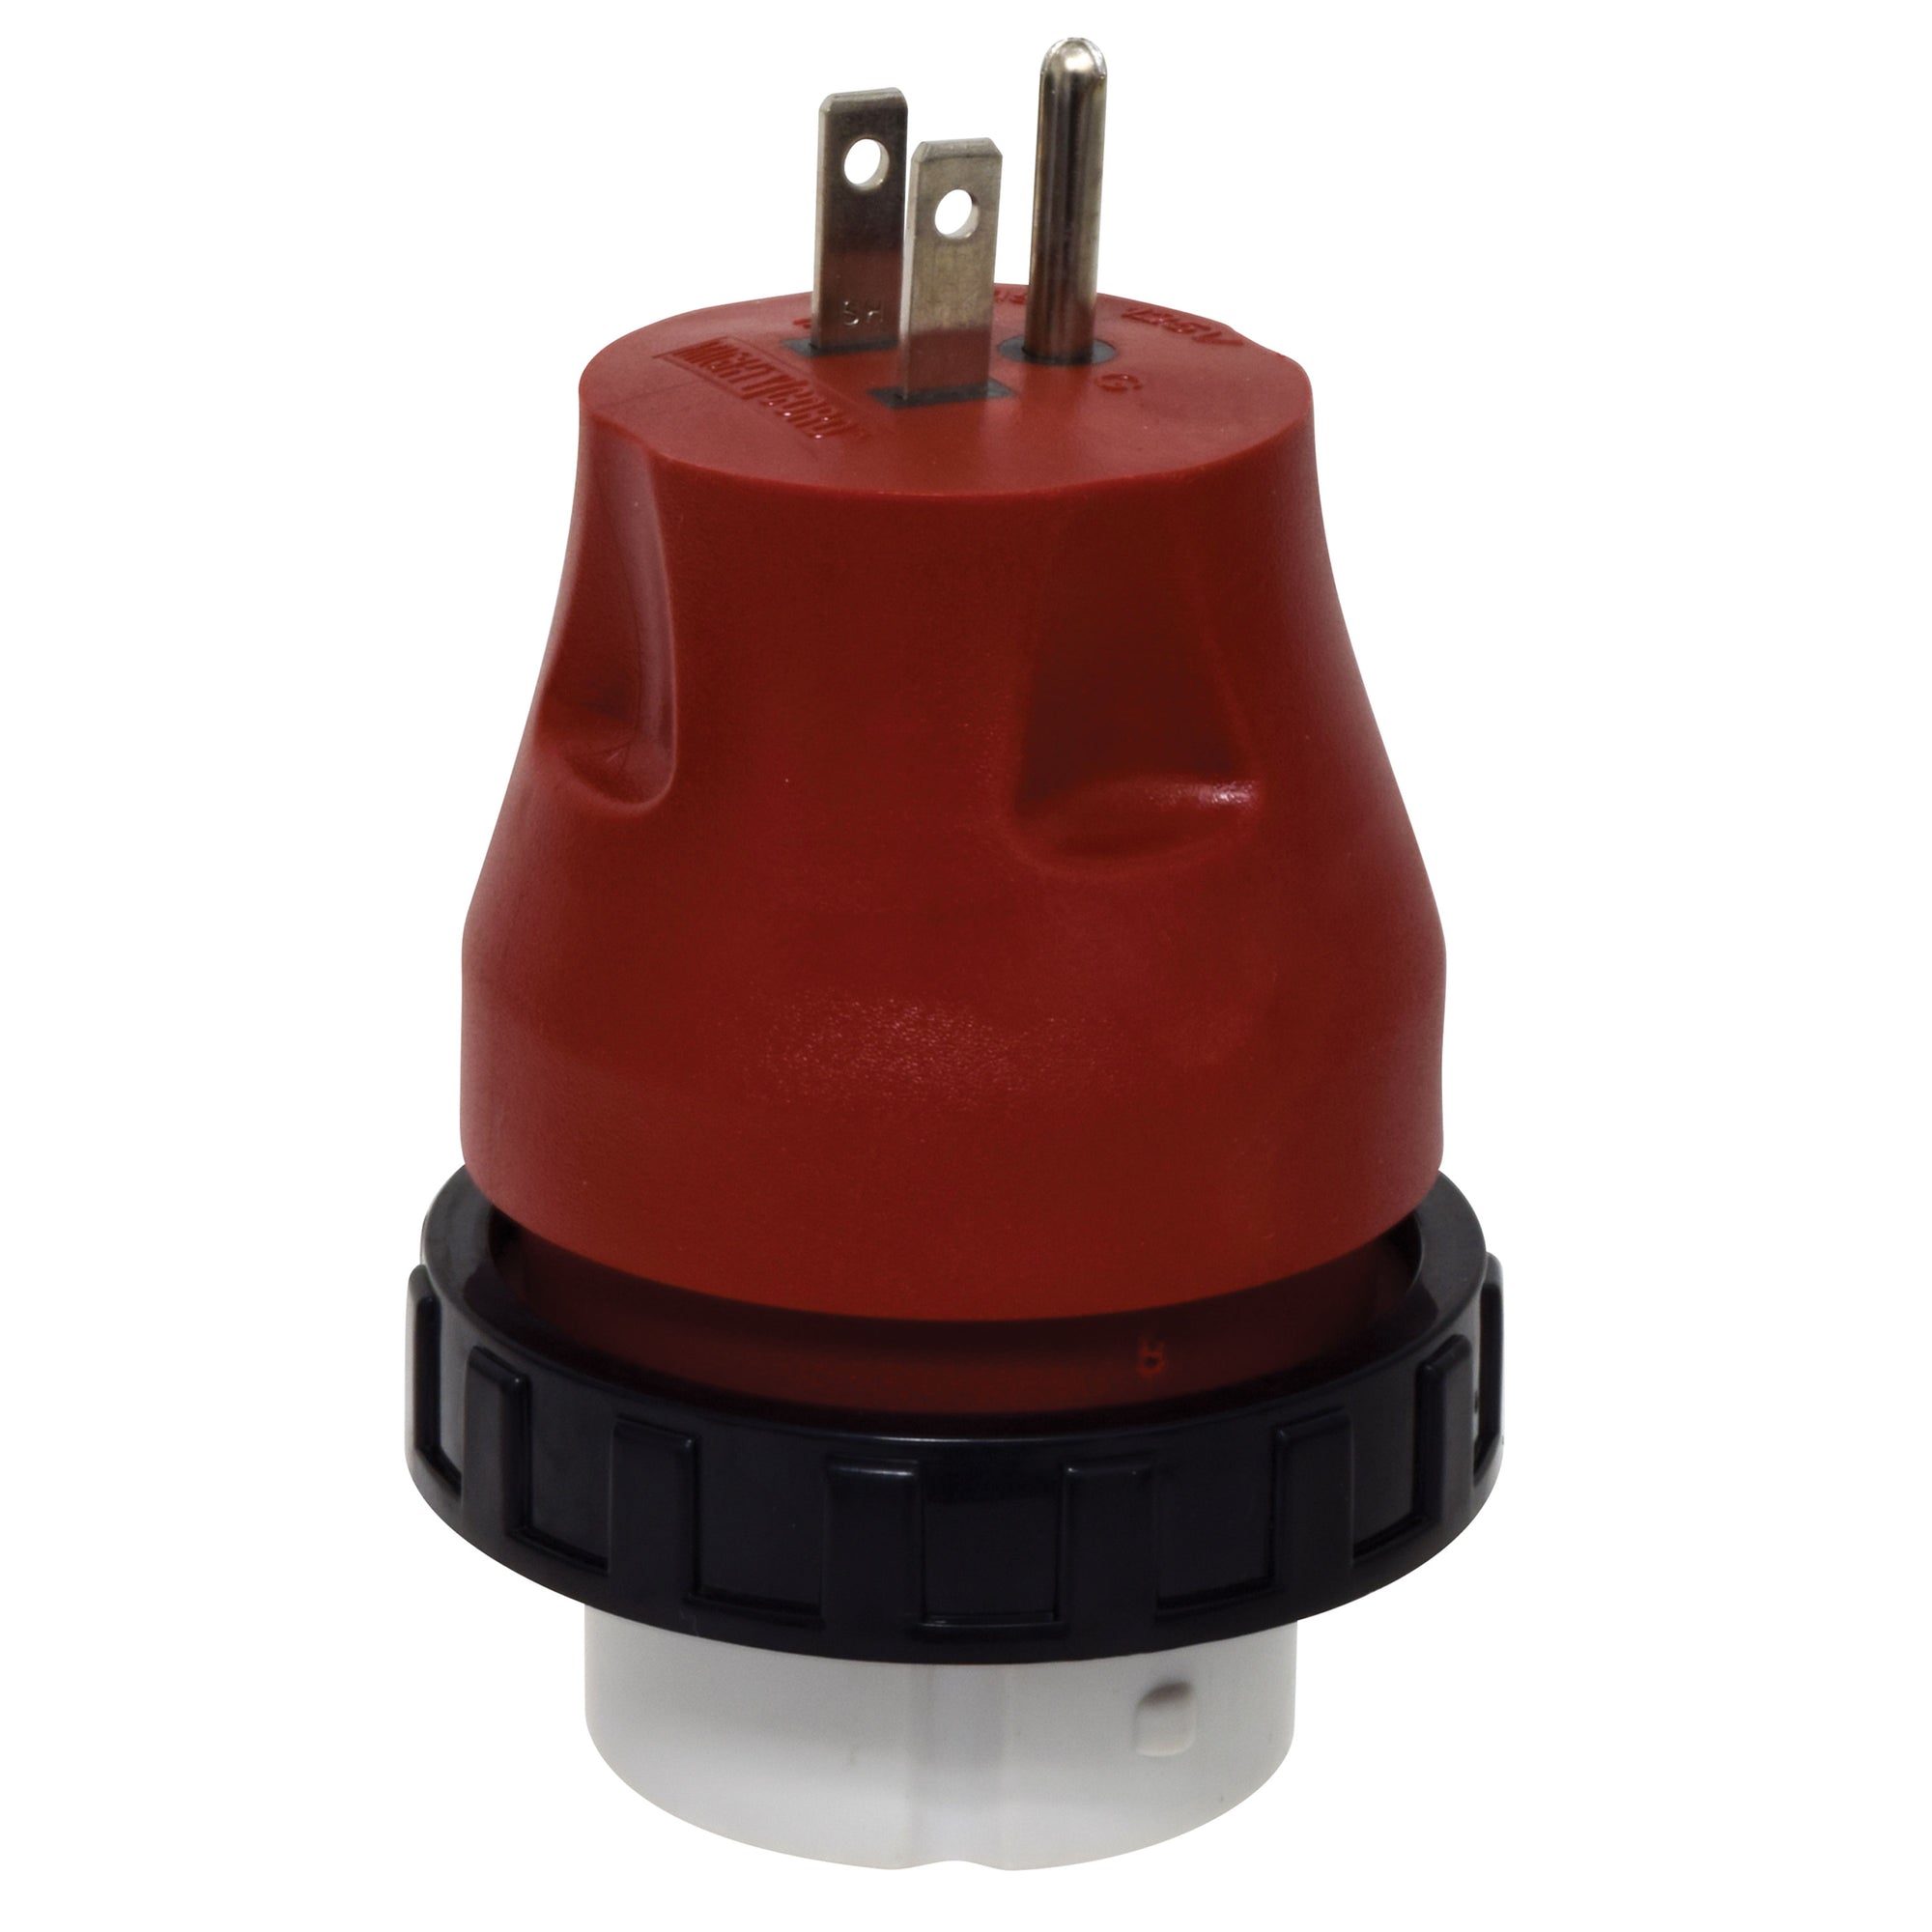 Valterra A10-1550DAVP Mighty Cord Detachable Adapter Plug - 15AM to 50AF, Red (Carded)